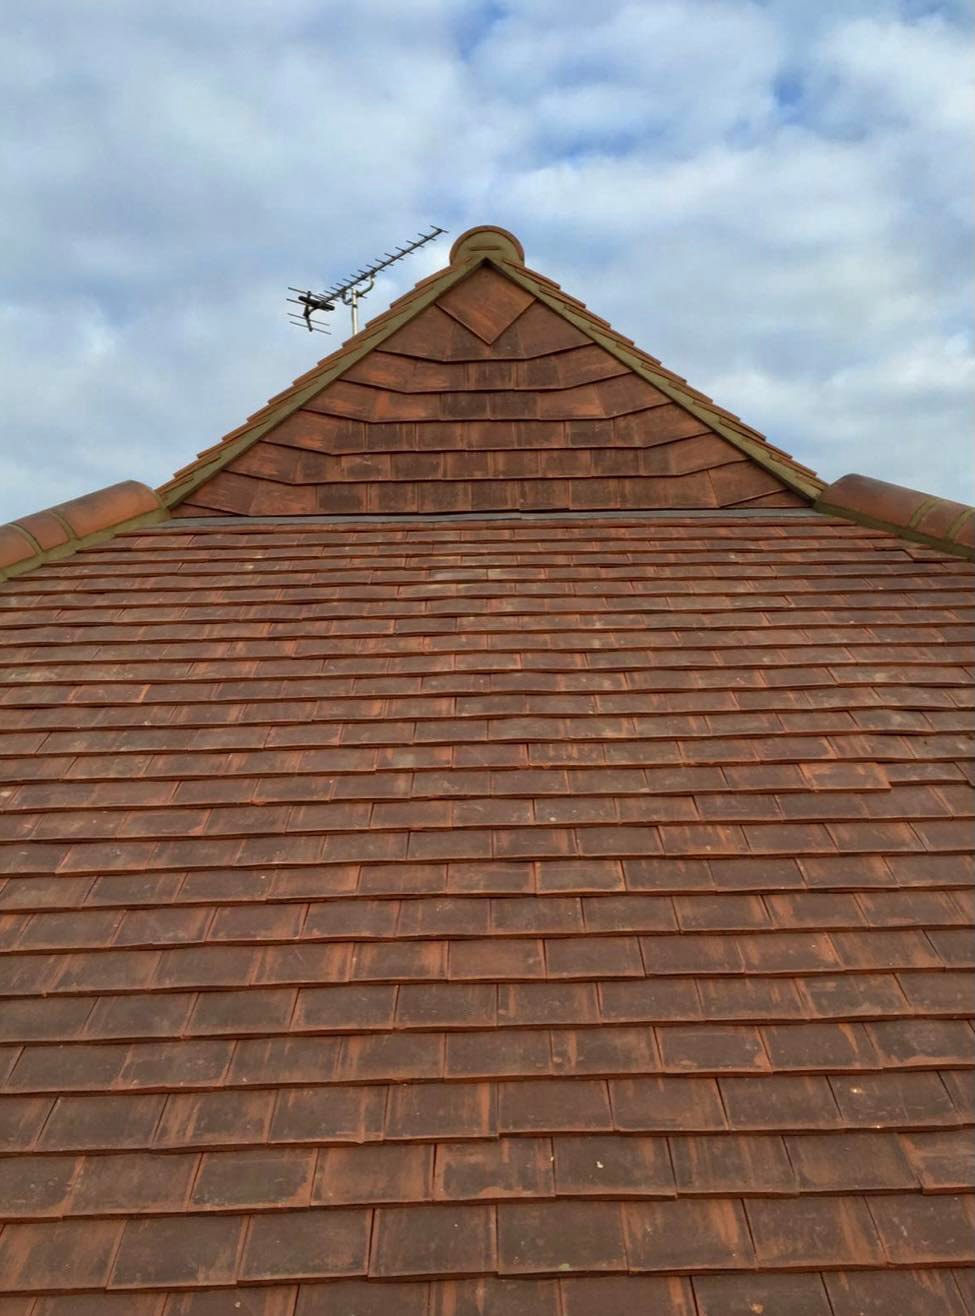 New tiles installed on a damaged roof